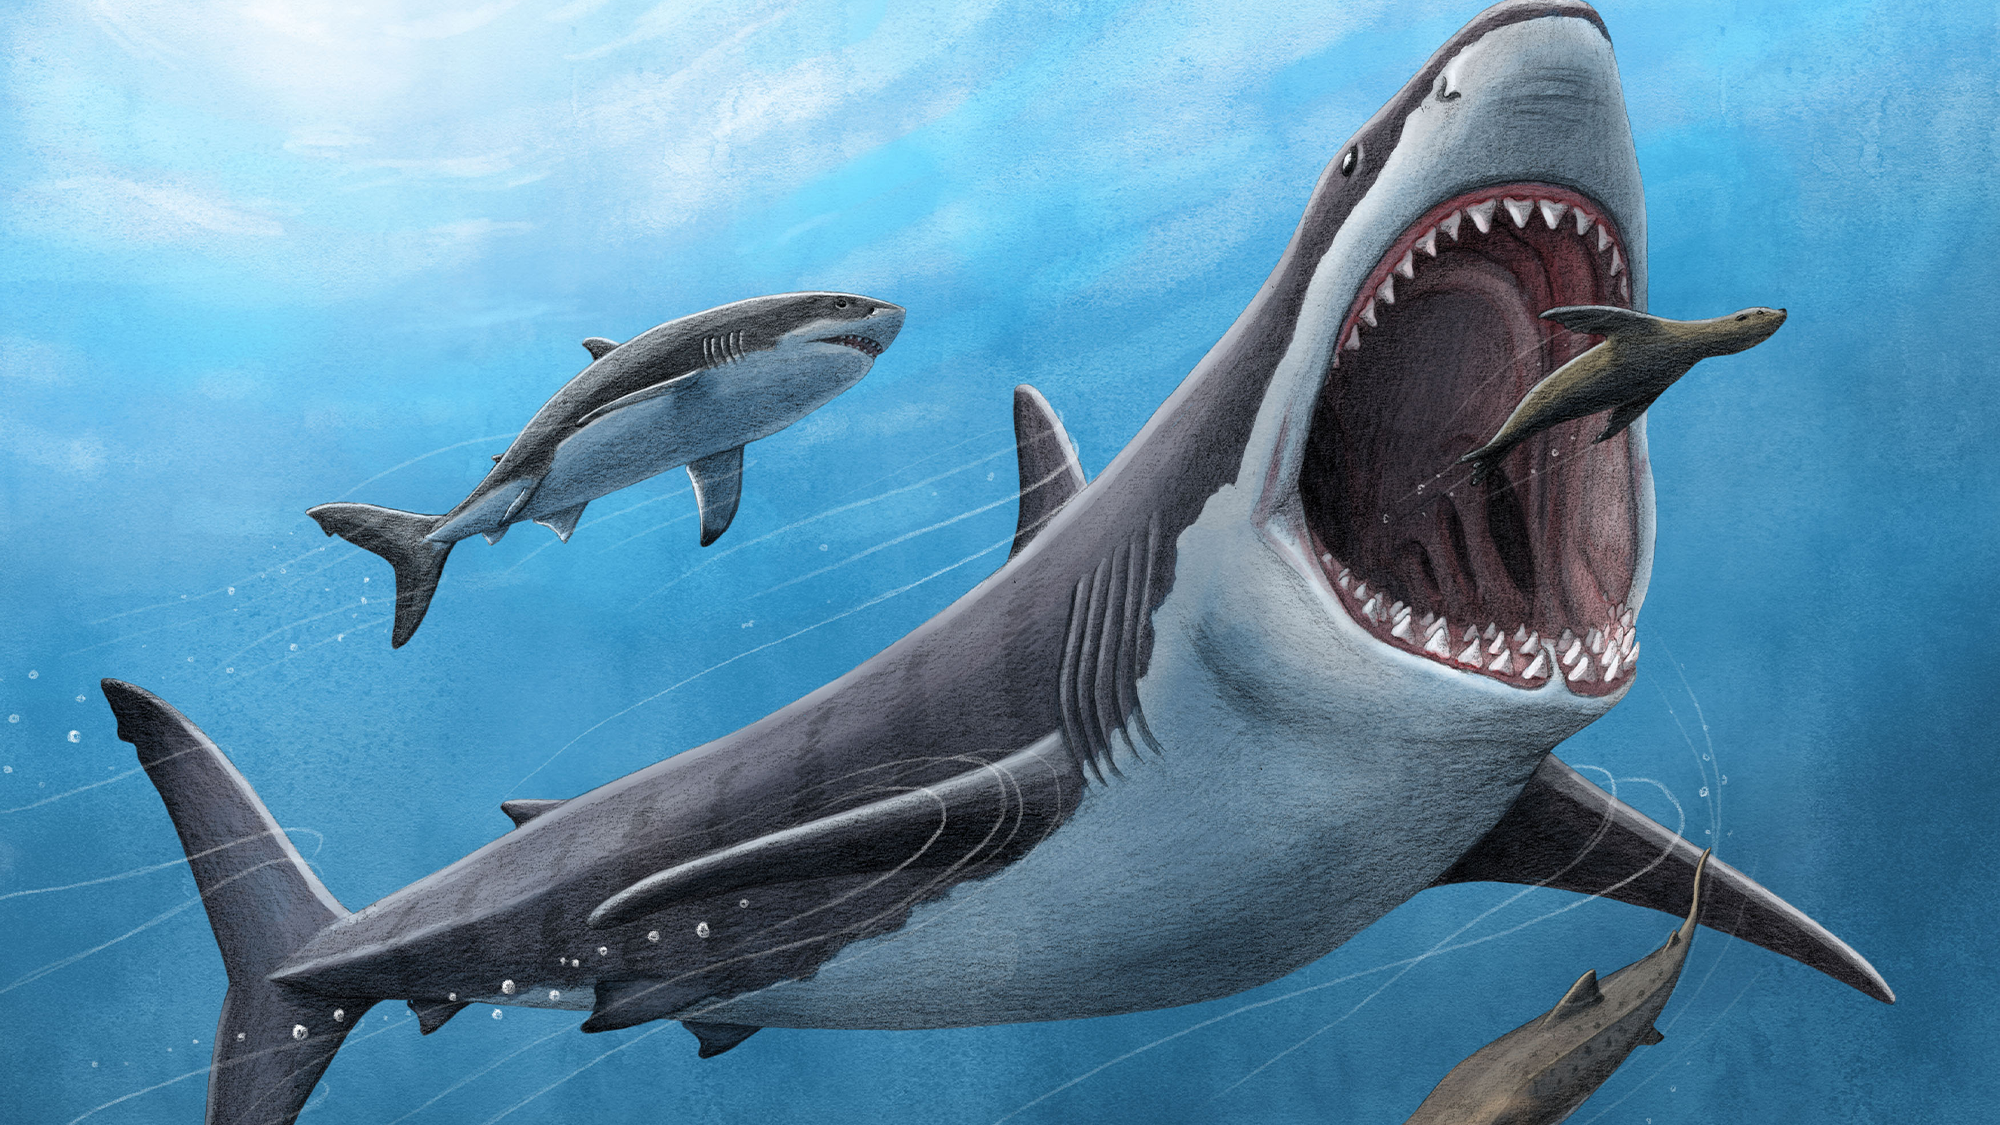 Megalodons were likely warm-blooded, despite being stone-cold killers